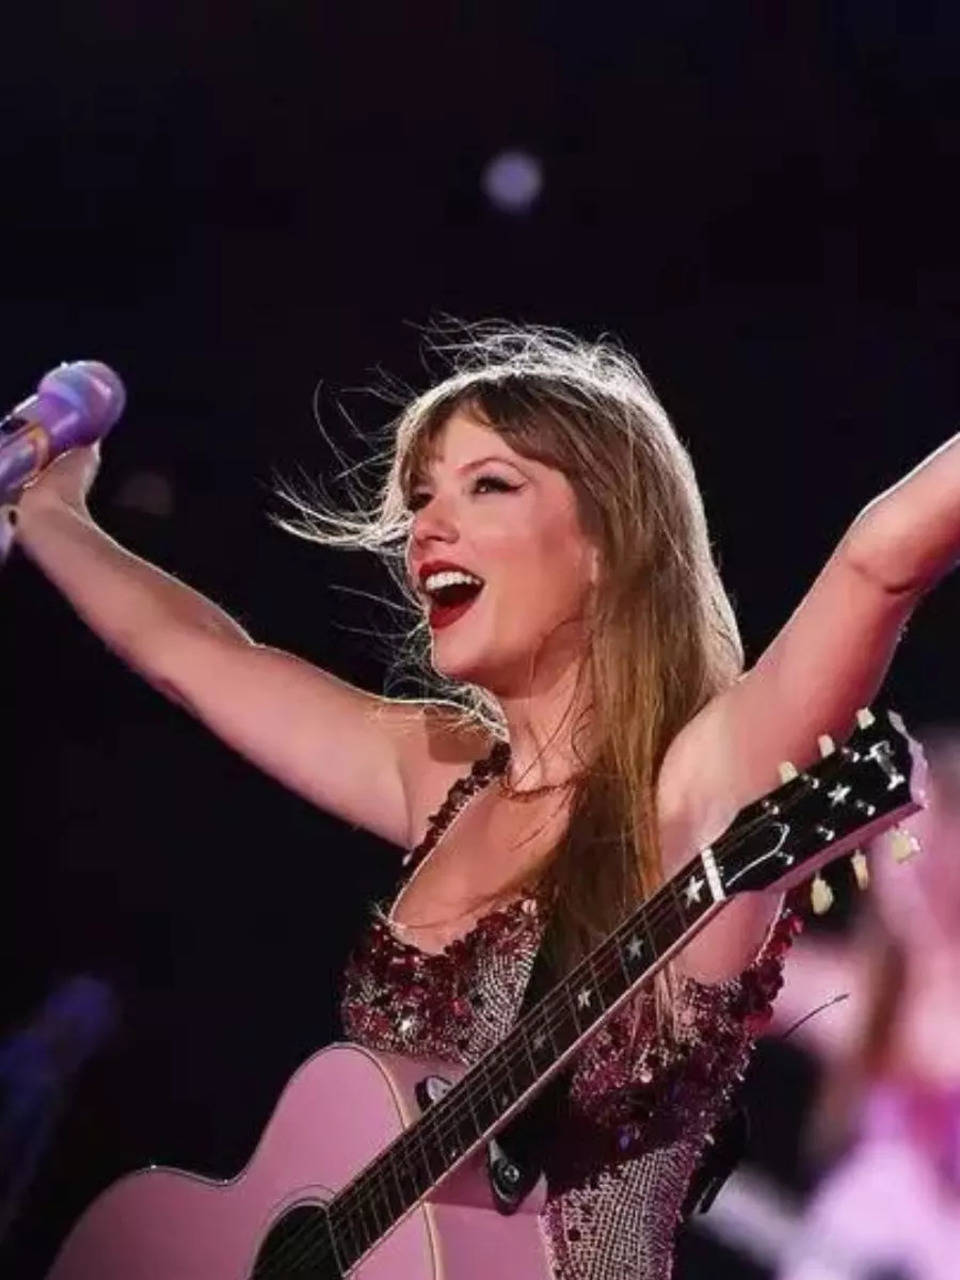 Taylor Swift classes are popping up at US universities from Harvard to  Arizona State